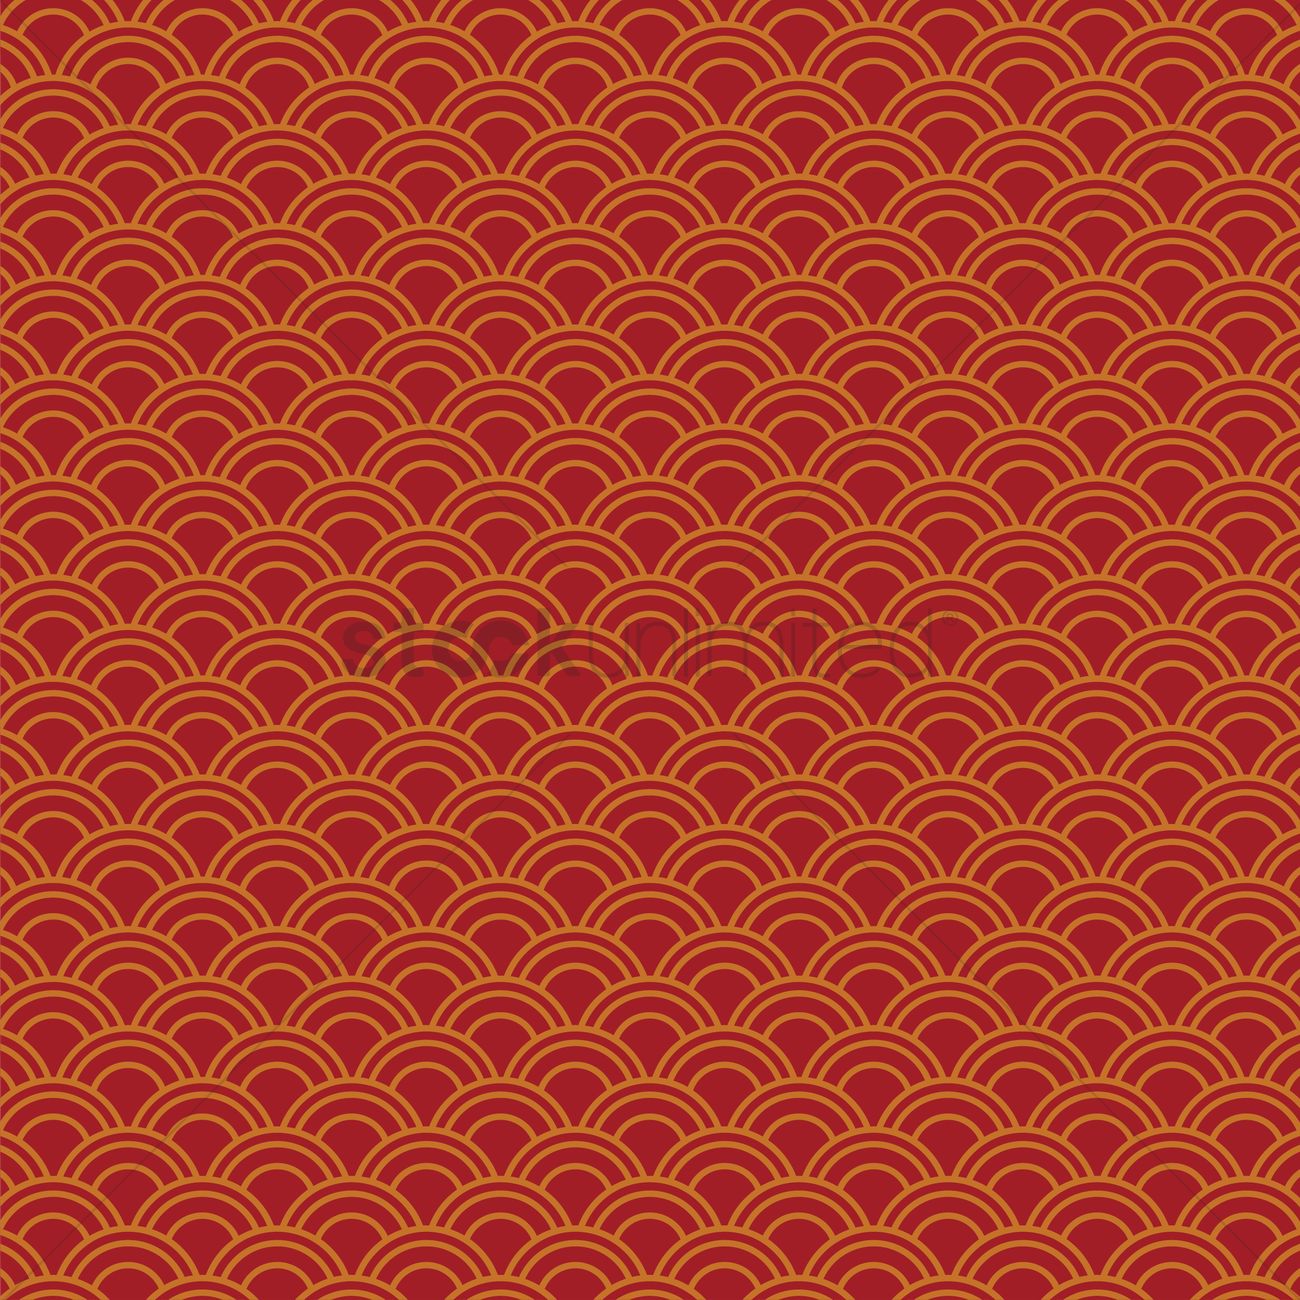 Chinese Pattern Vector Image 1577039  StockUnlimited Design